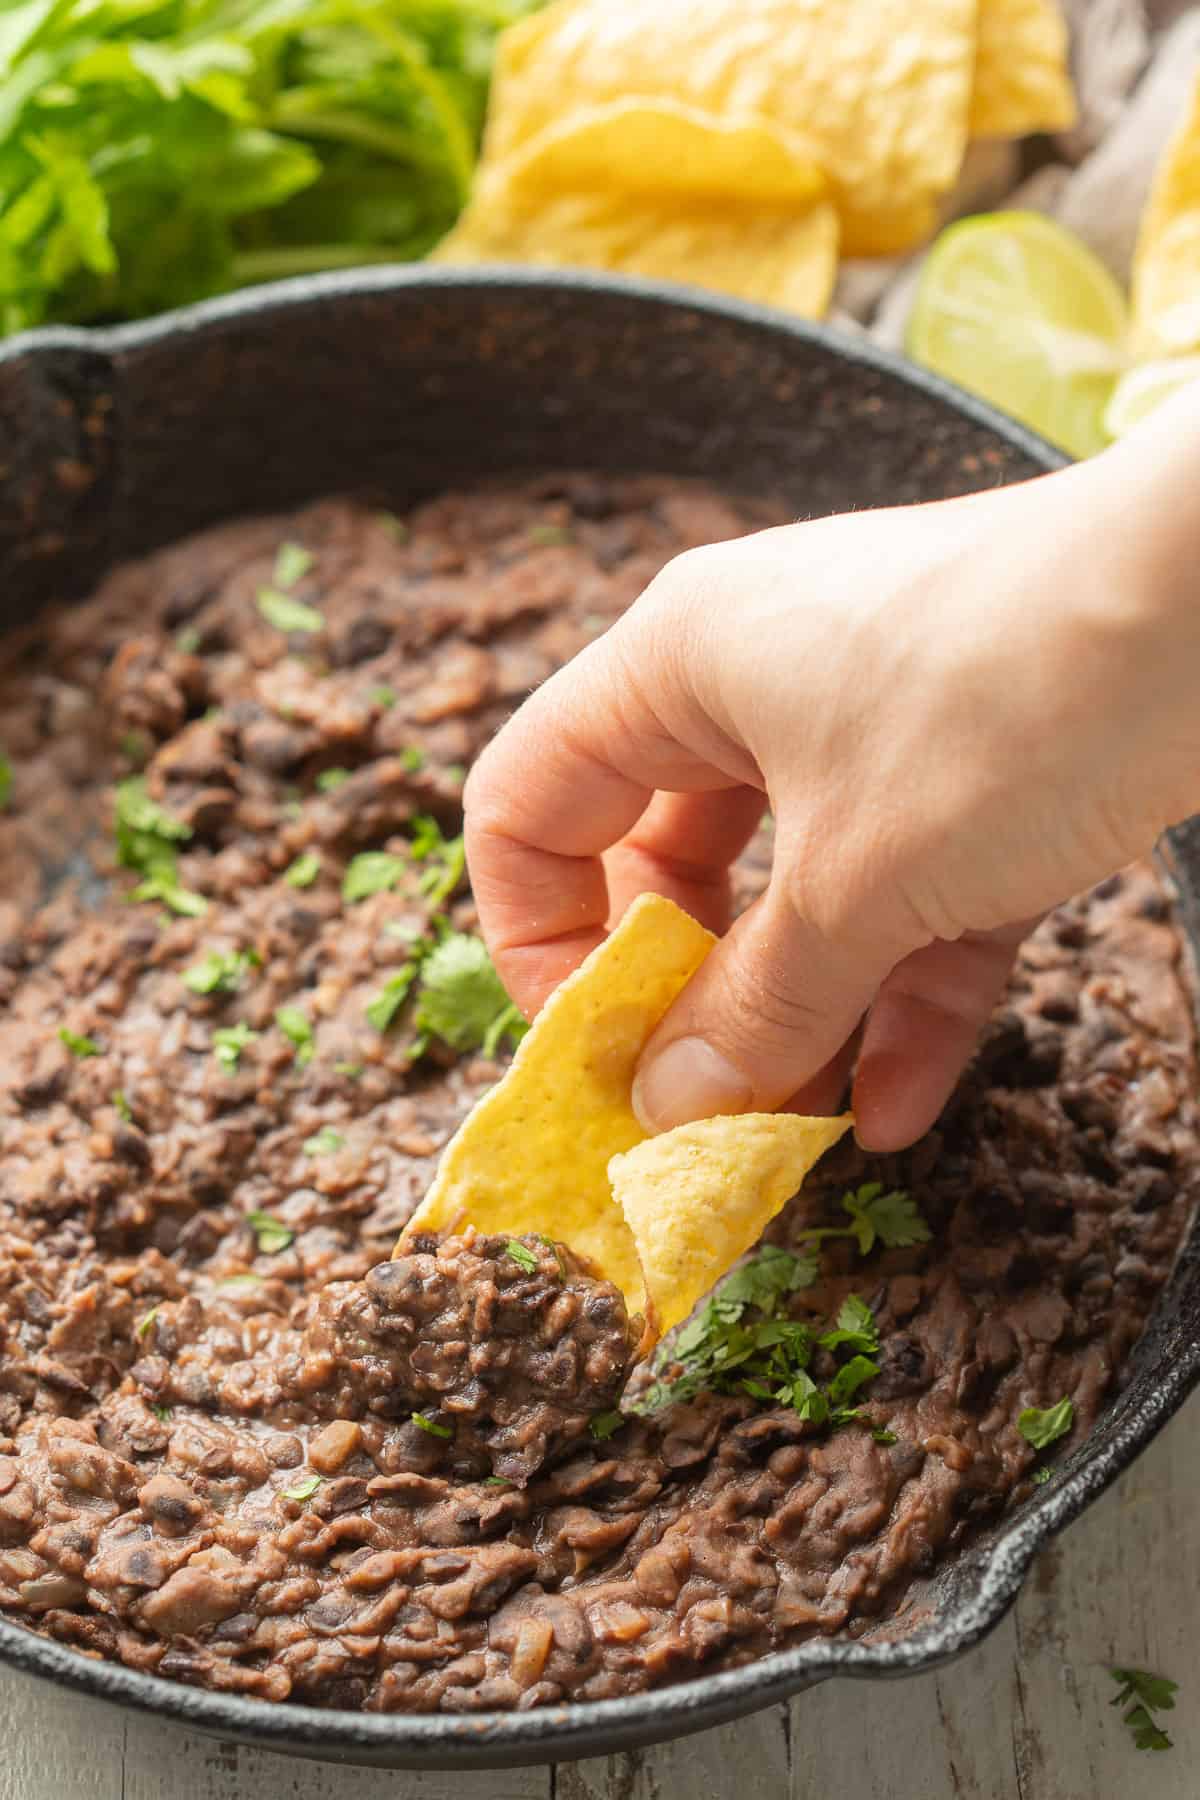 Hand dipping a tortilla chip into a skillet of Refried Black Beans.